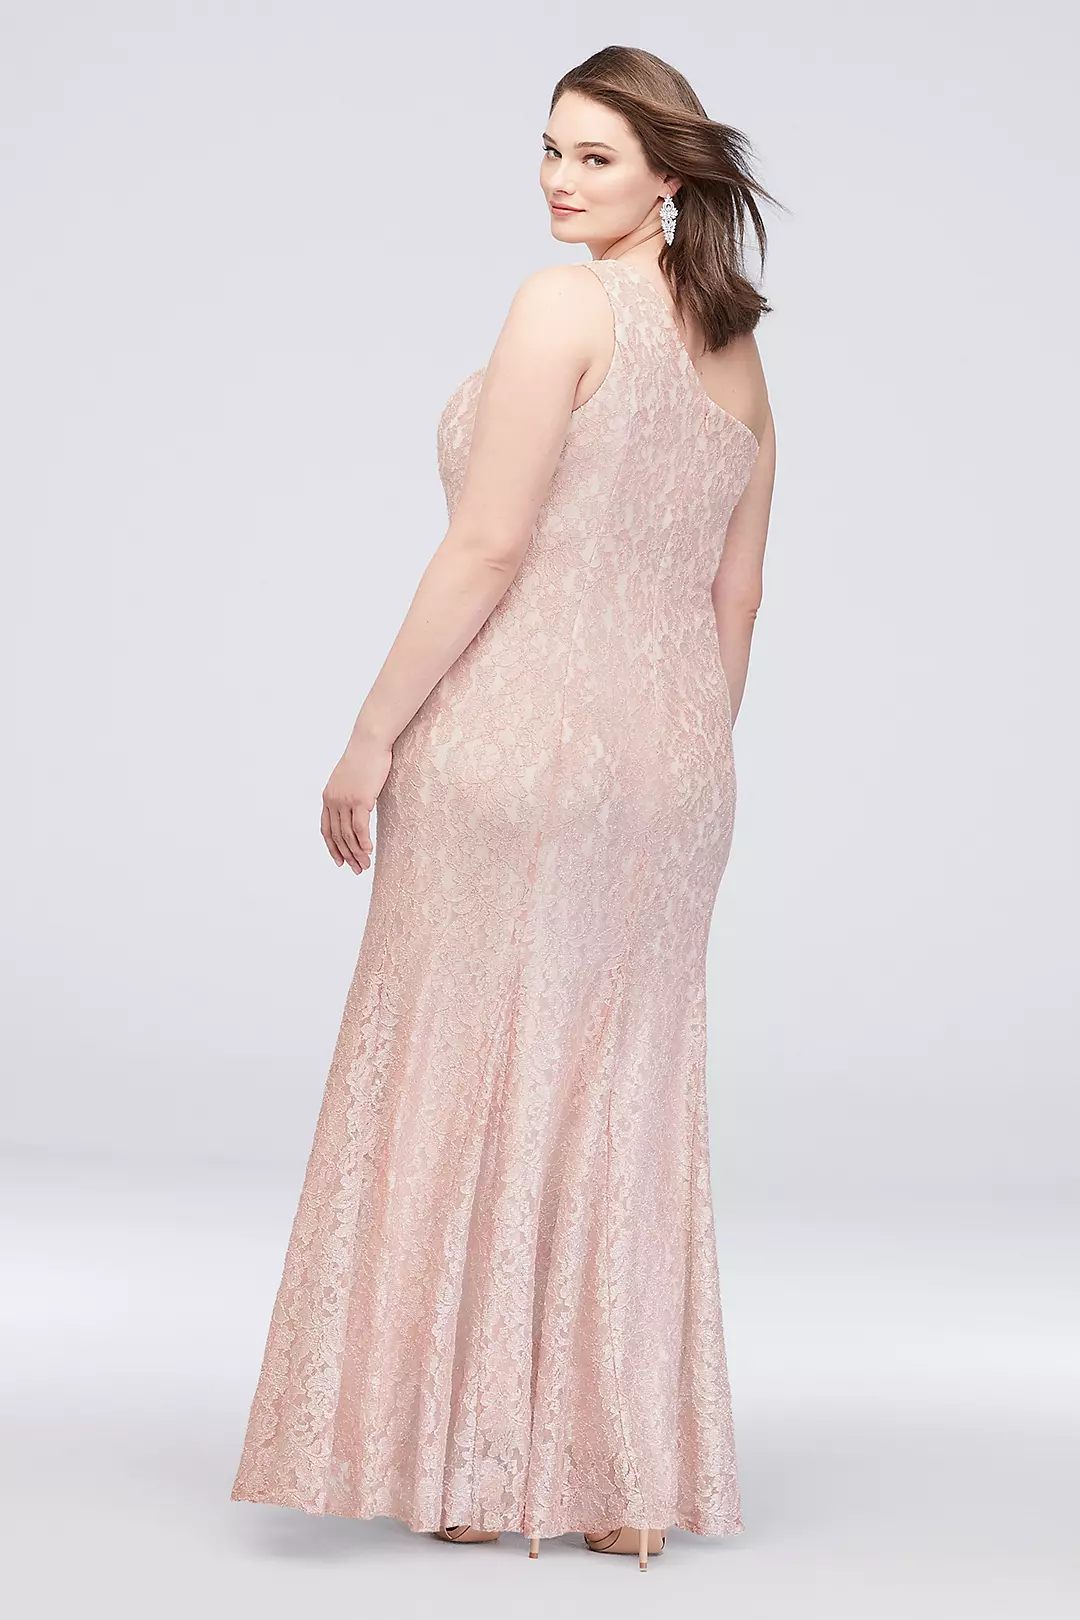 One-Shoulder Glitter Lace Mermaid Gown Image 2